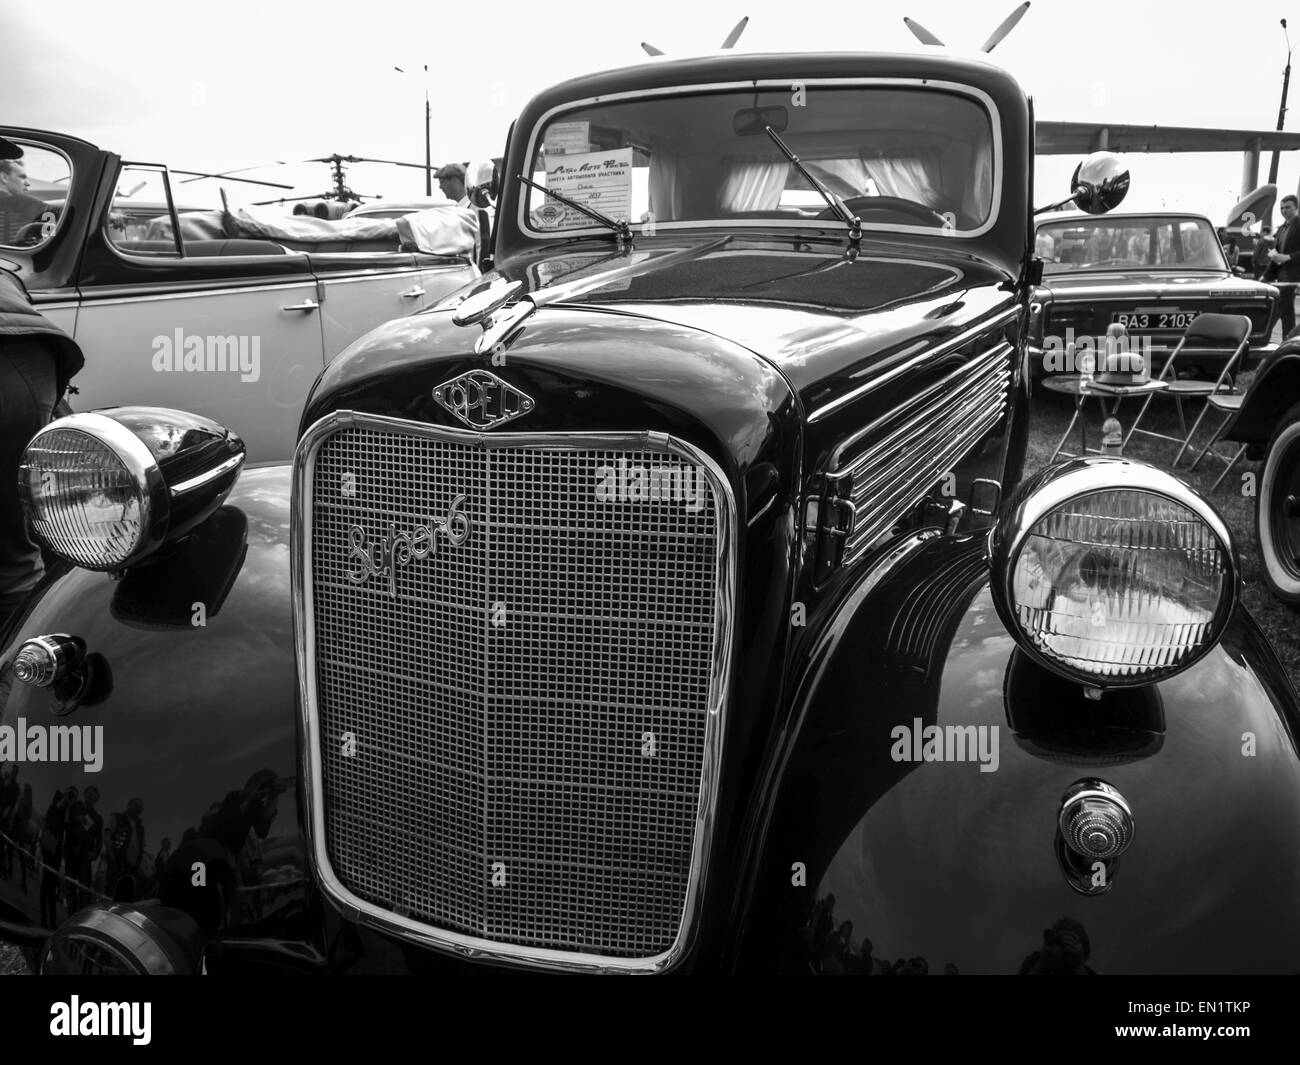 April 25, 2015 - Opel Super 6 -- The Retro OldCarFest is the biggest retro cars festival held in Kiev, and covers the State Aviation Museum grounds. More than 300 cars are involved into this project and more than 20 thousand visitors are expected to attend. © Igor Golovniov/ZUMA Wire/Alamy Live News Stock Photo